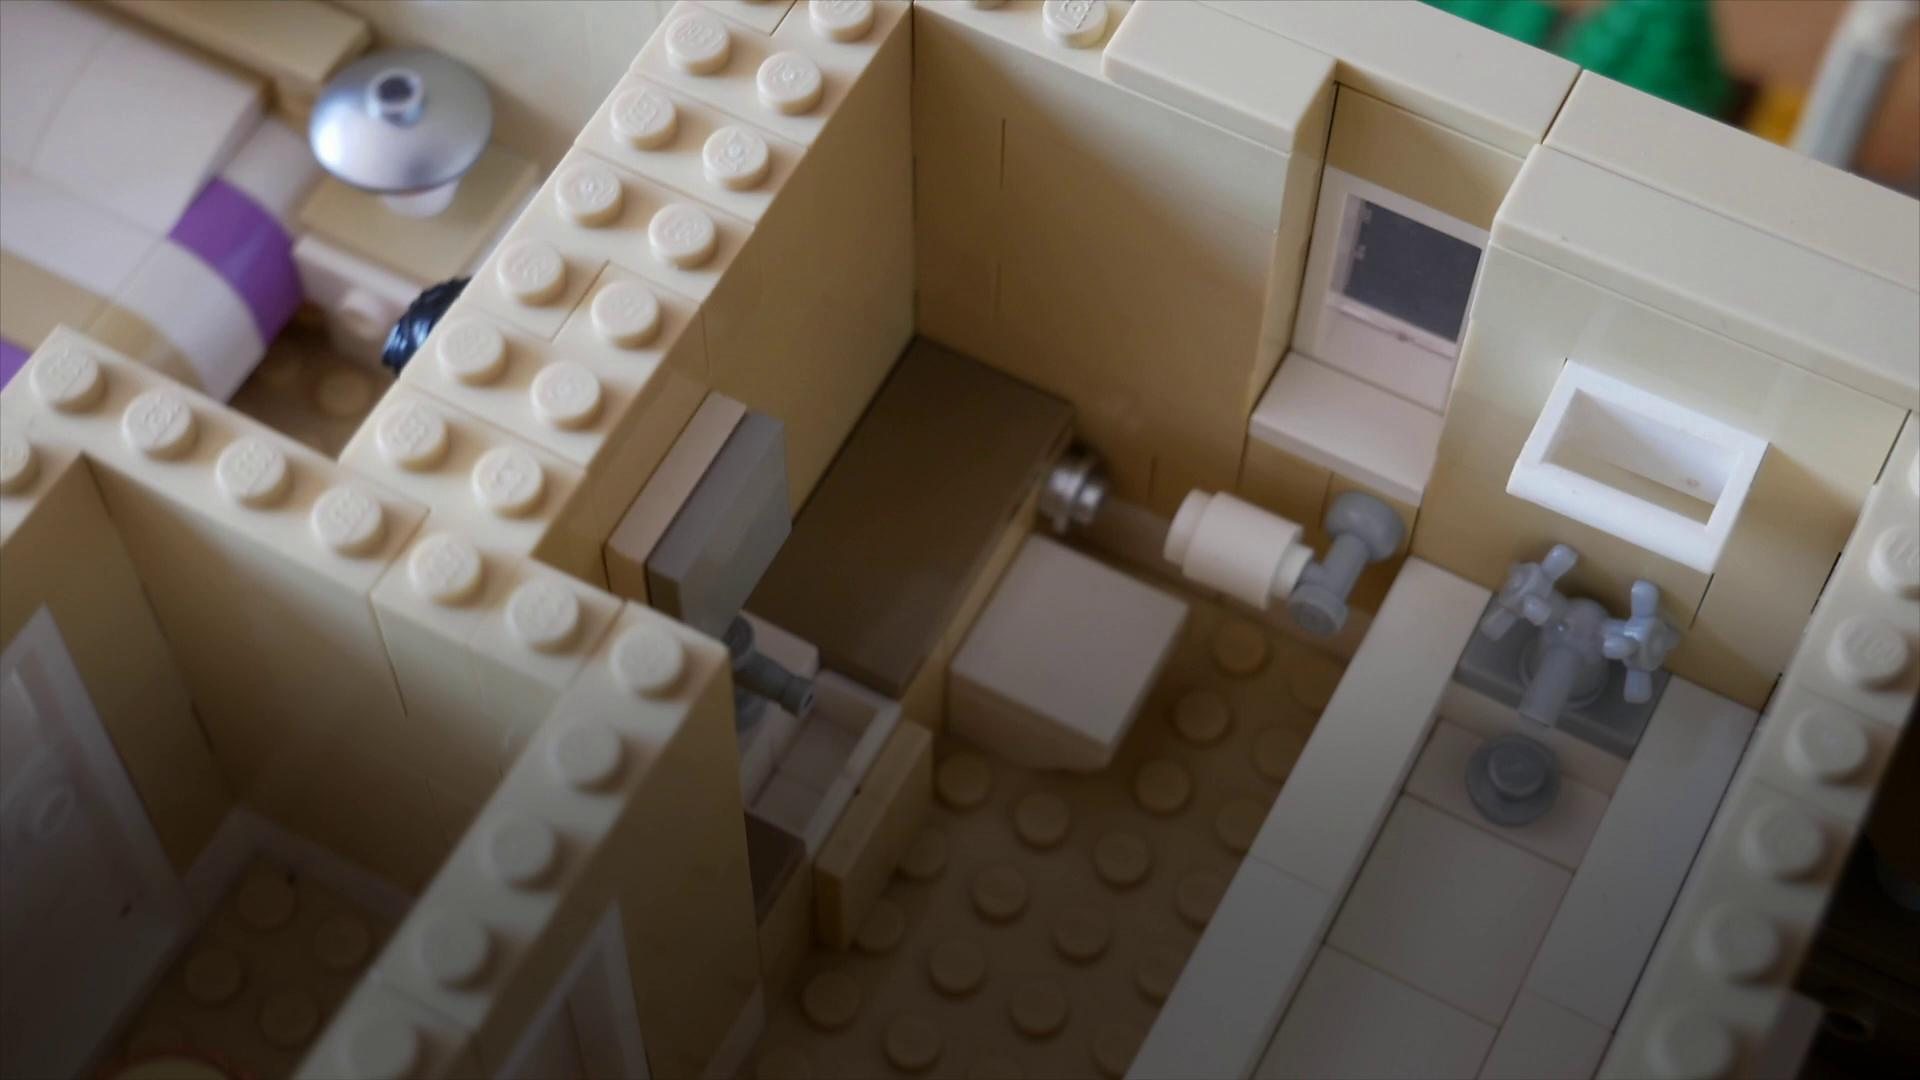 Man builds replica of his home in Lego News